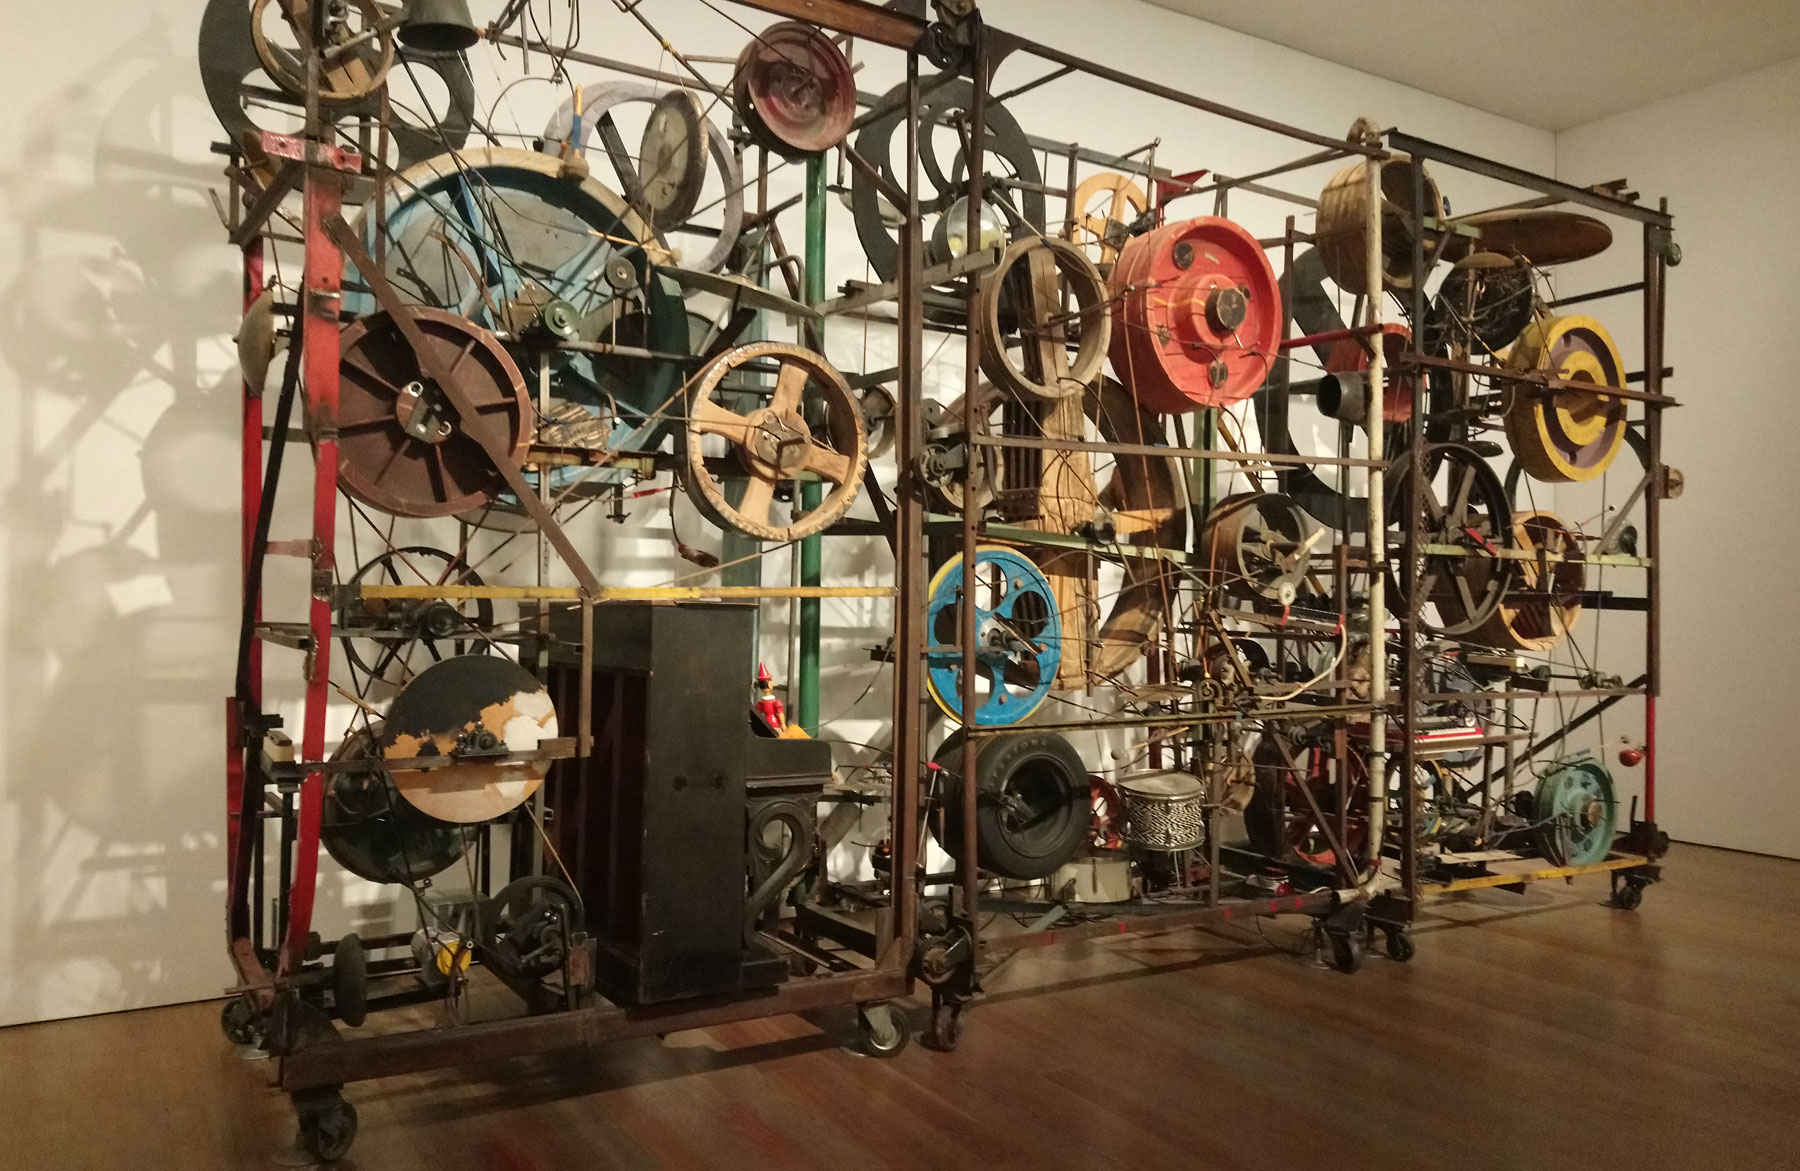 The engaging Tinguely Museum Basel, the institution where Jean Tinguely's work on